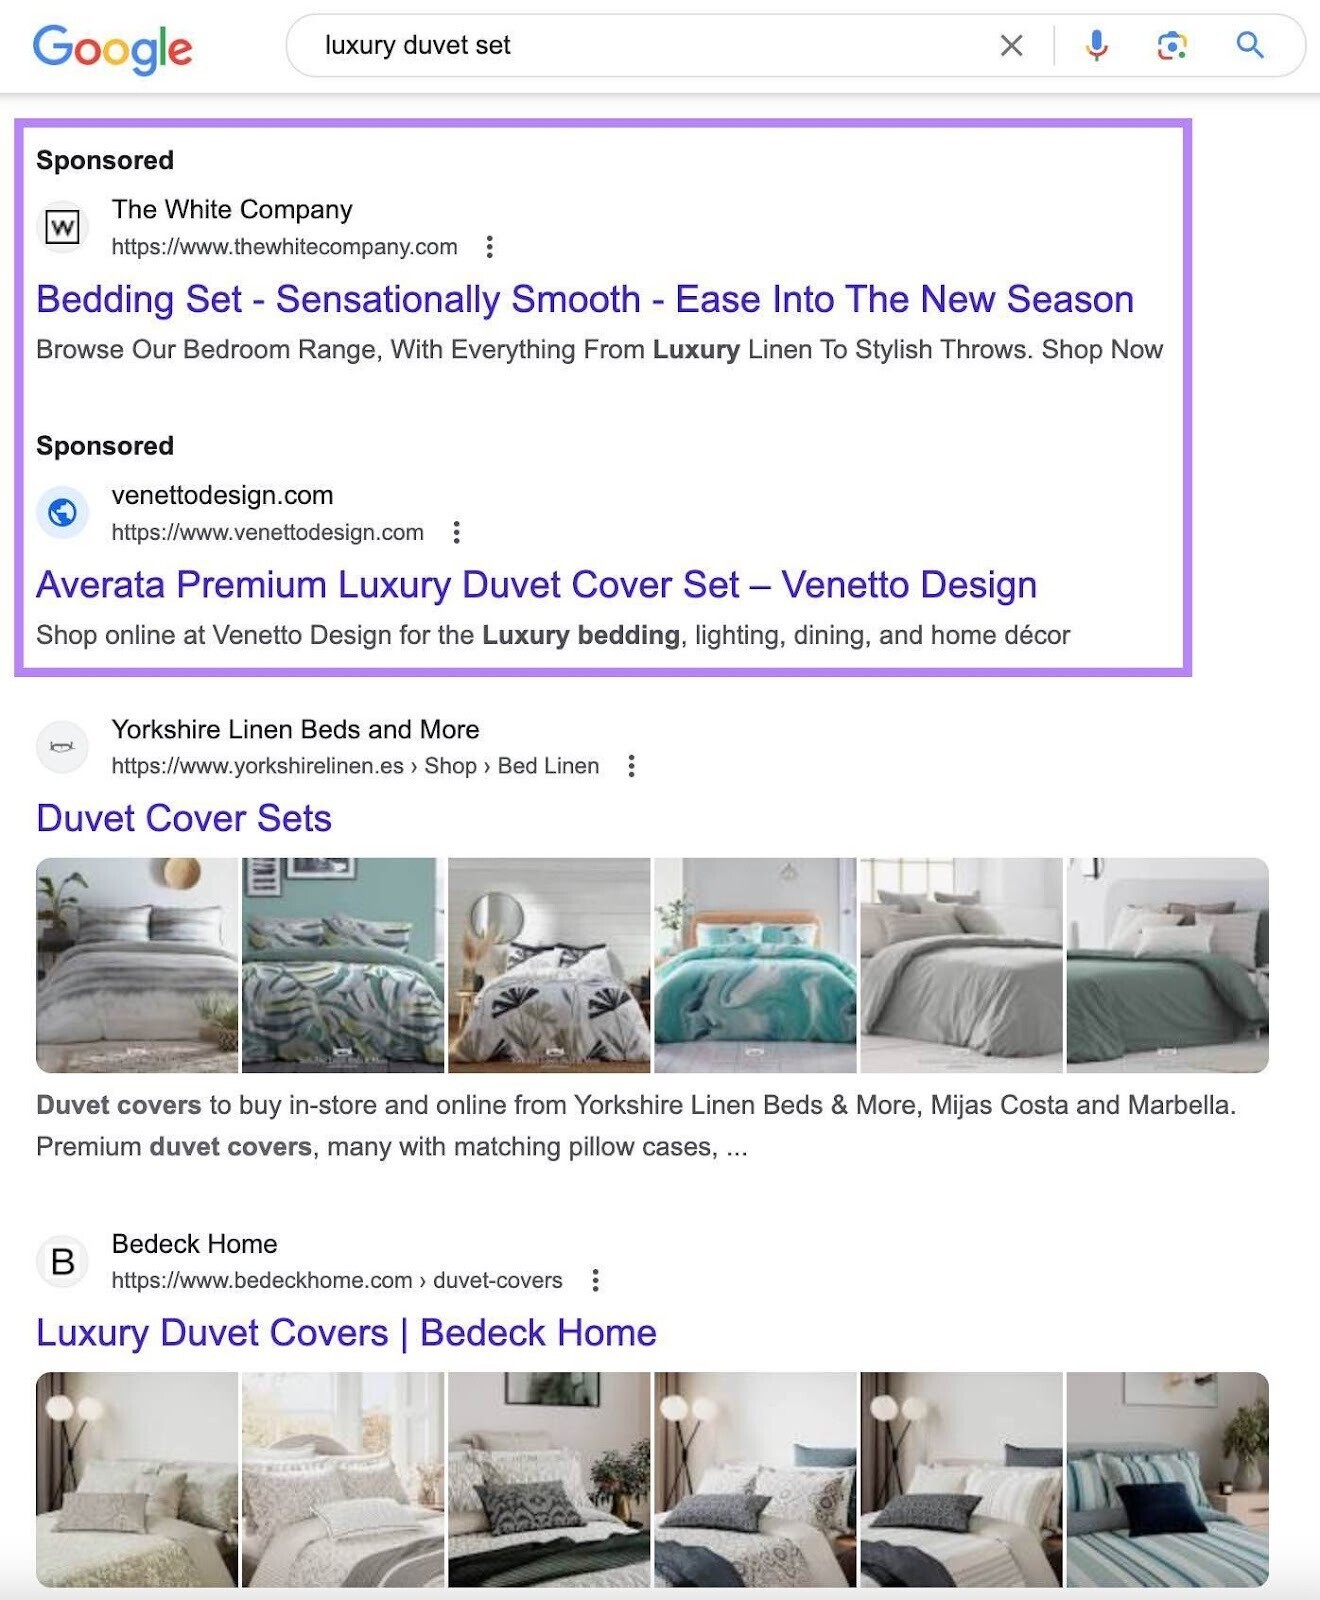 paid search ads at the top of a Google results page for "luxury duvet set"